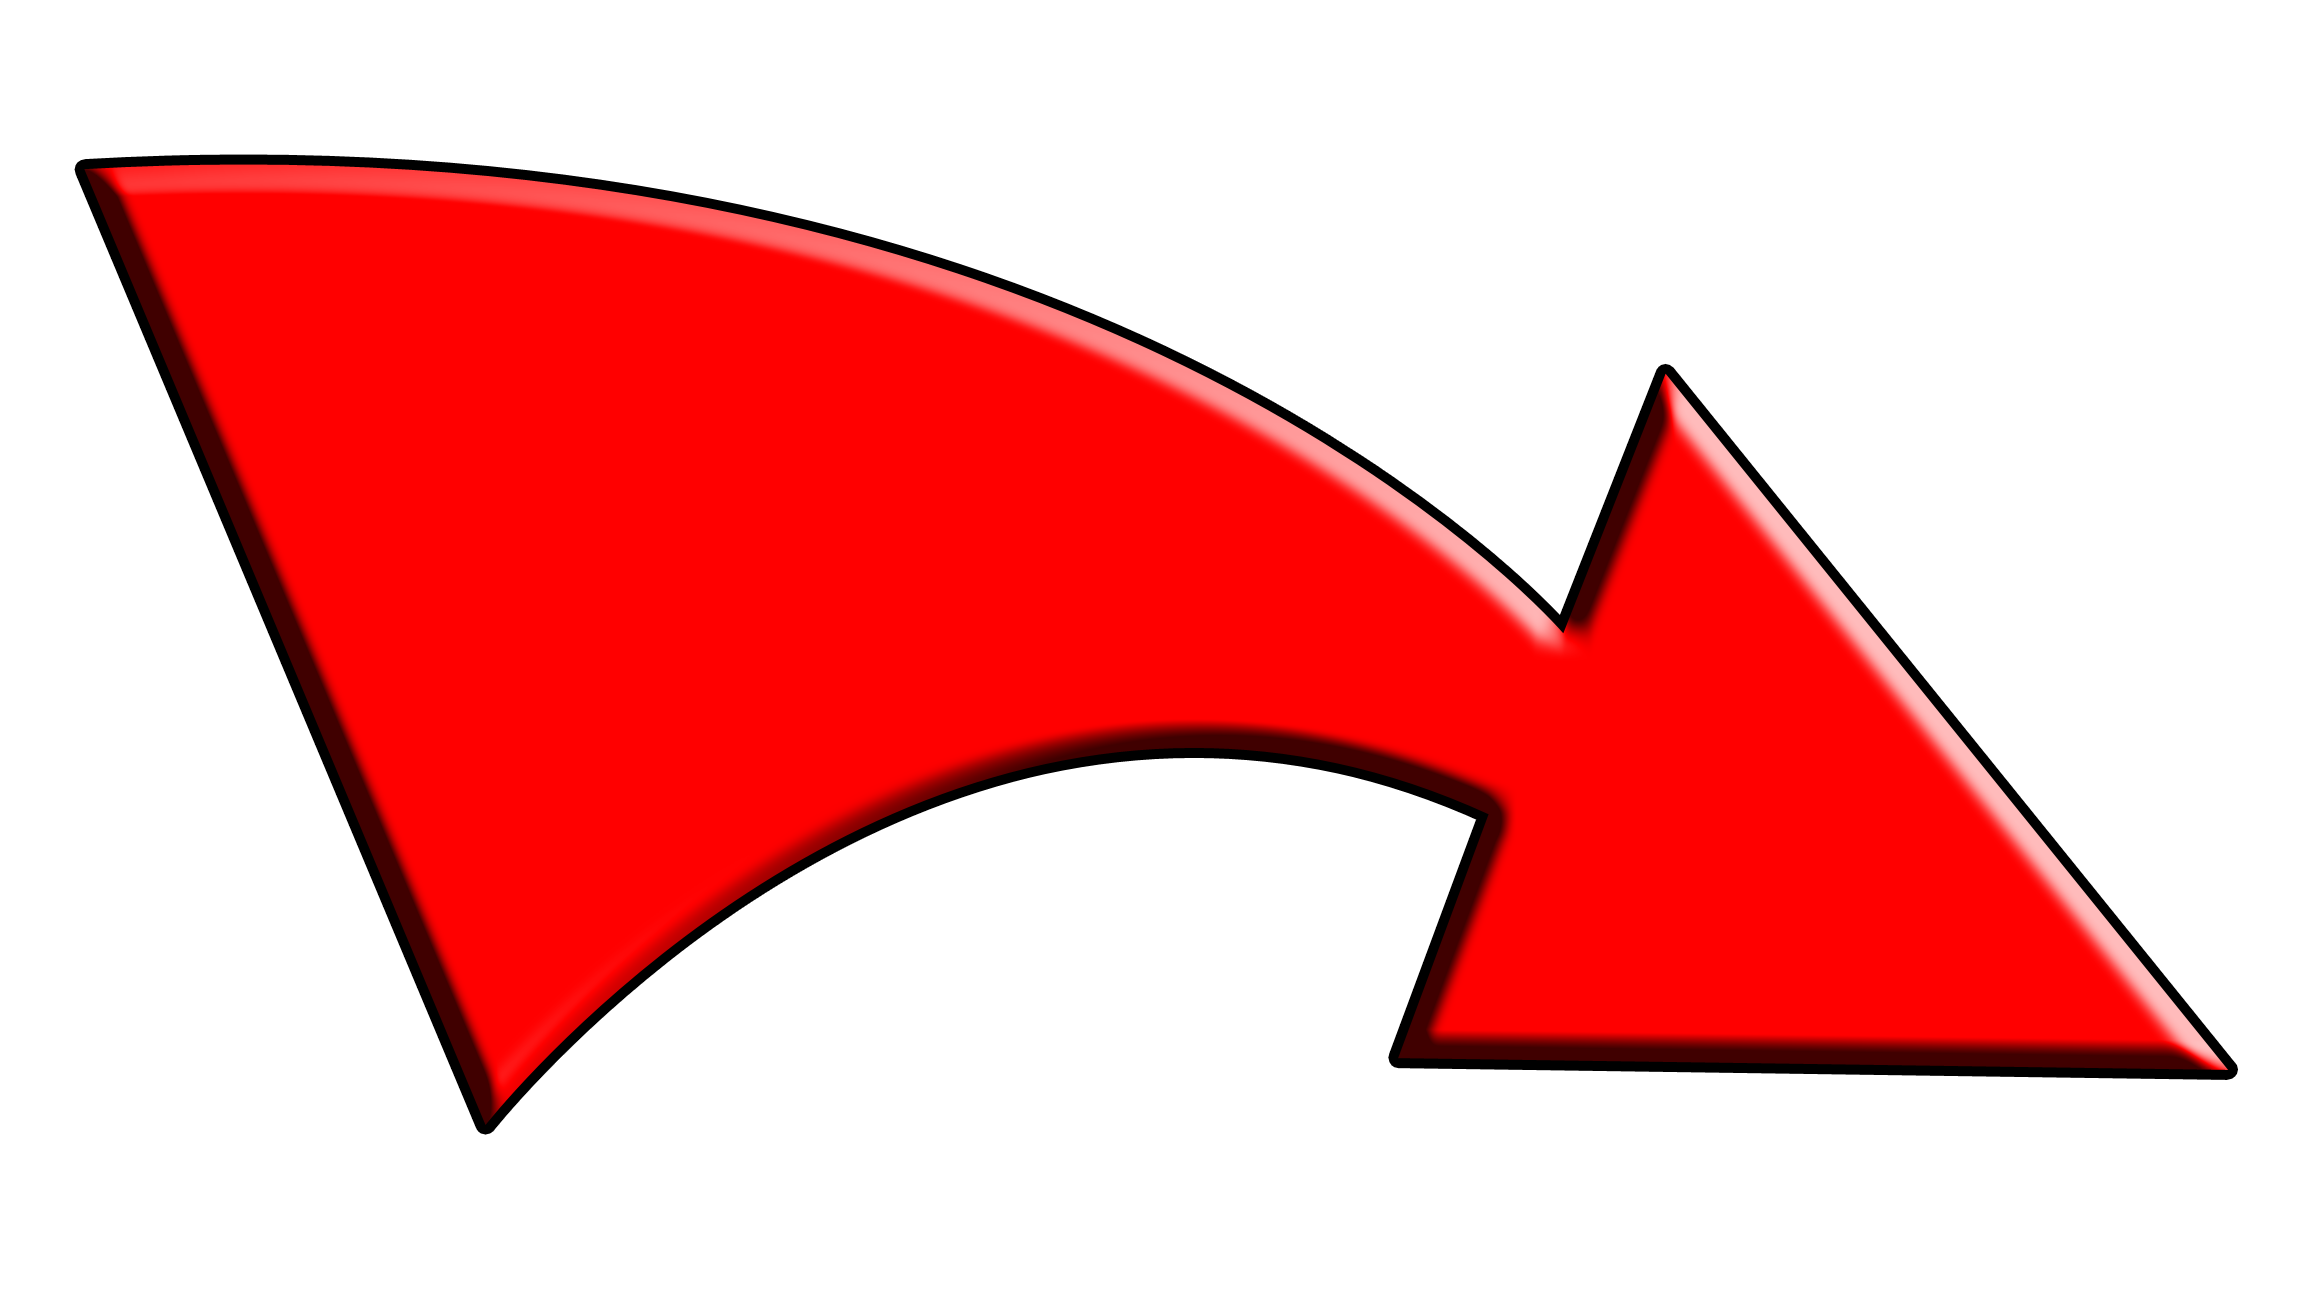 Free Red Arrow Image, Download Free Clip Art, Free Clip ...